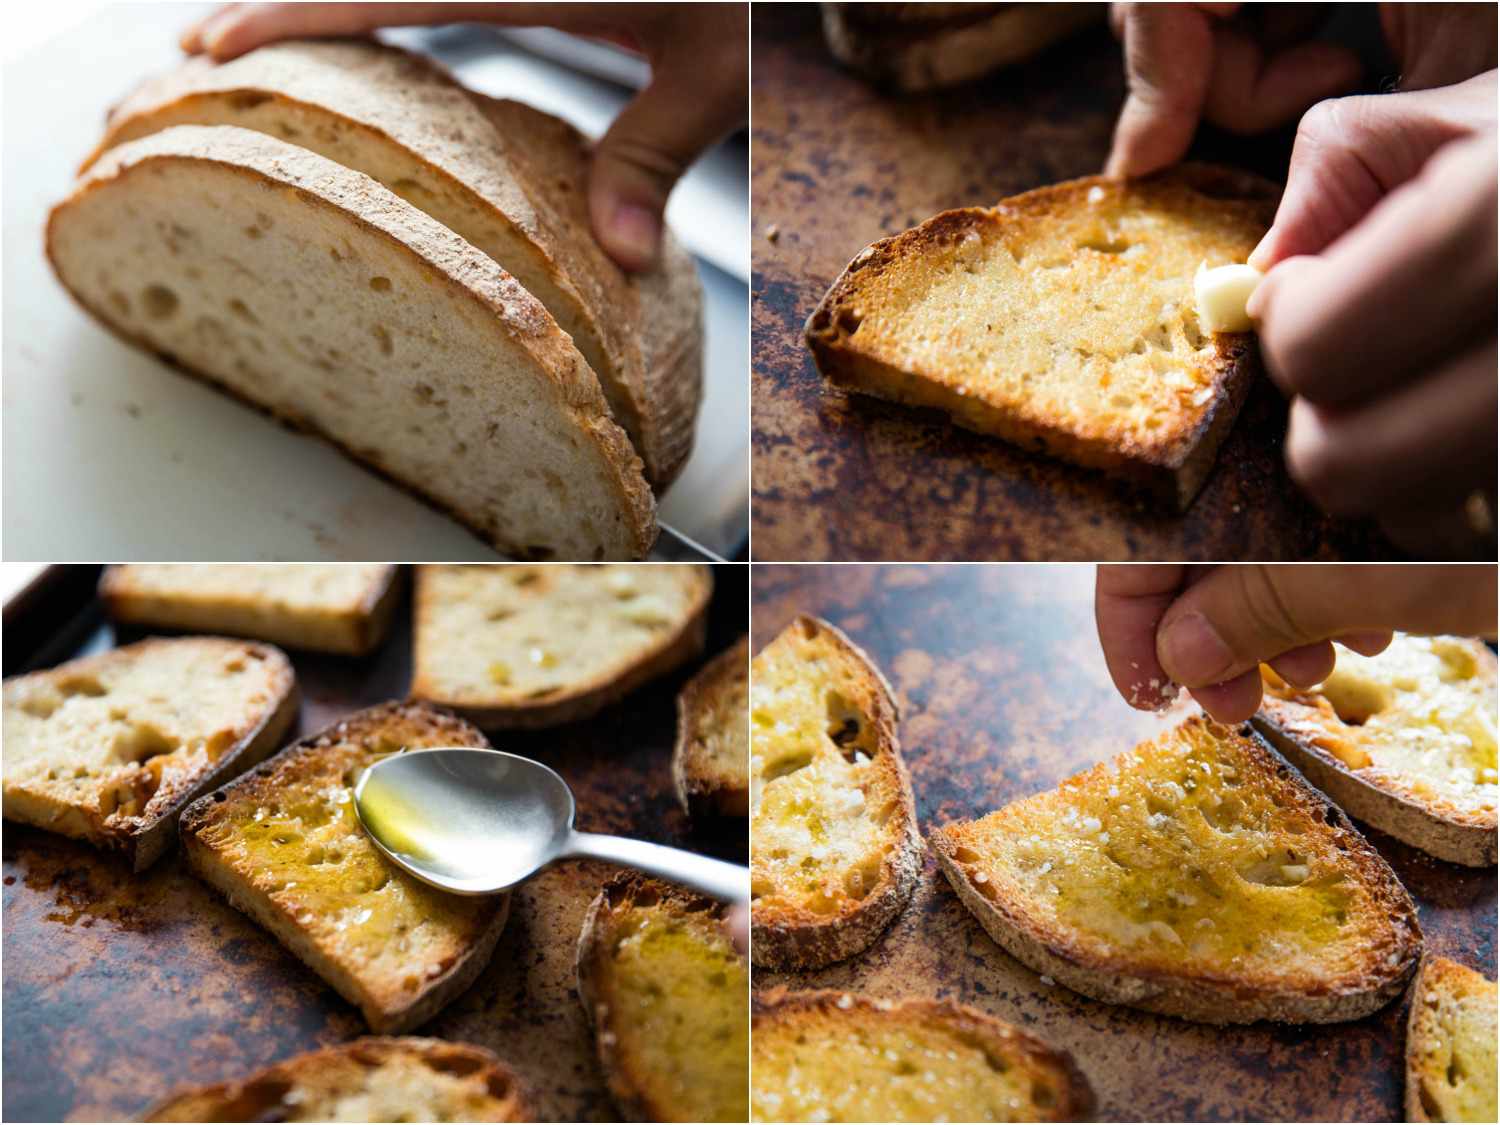 Collage of bread being sliced, toasted, rubbed with a garlic clove, and topped with olive oil and salt.